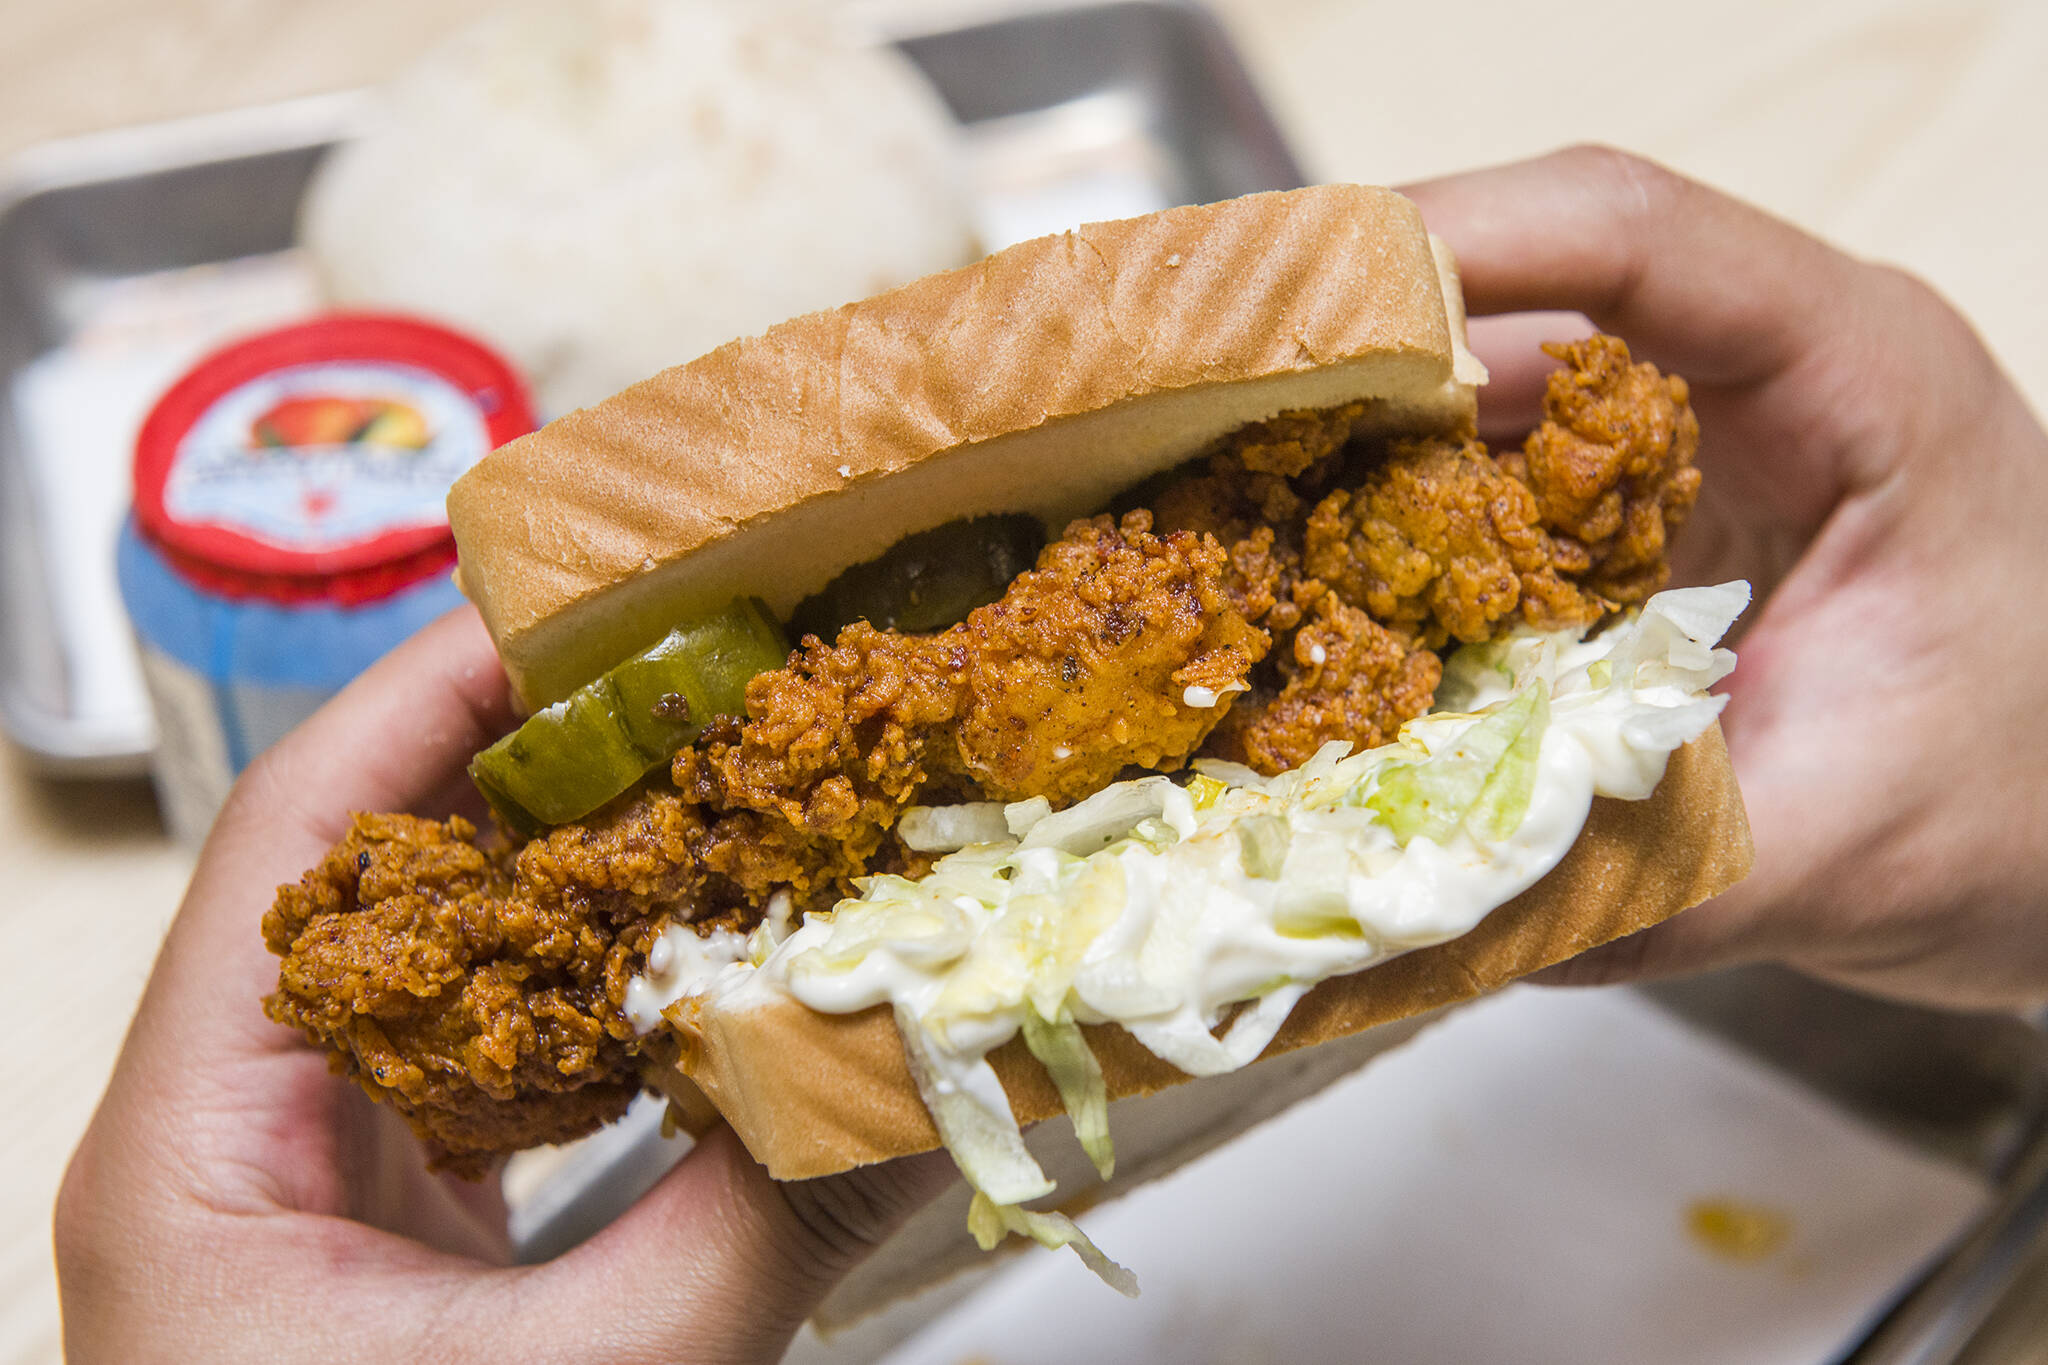 The Best Sandwiches in Toronto